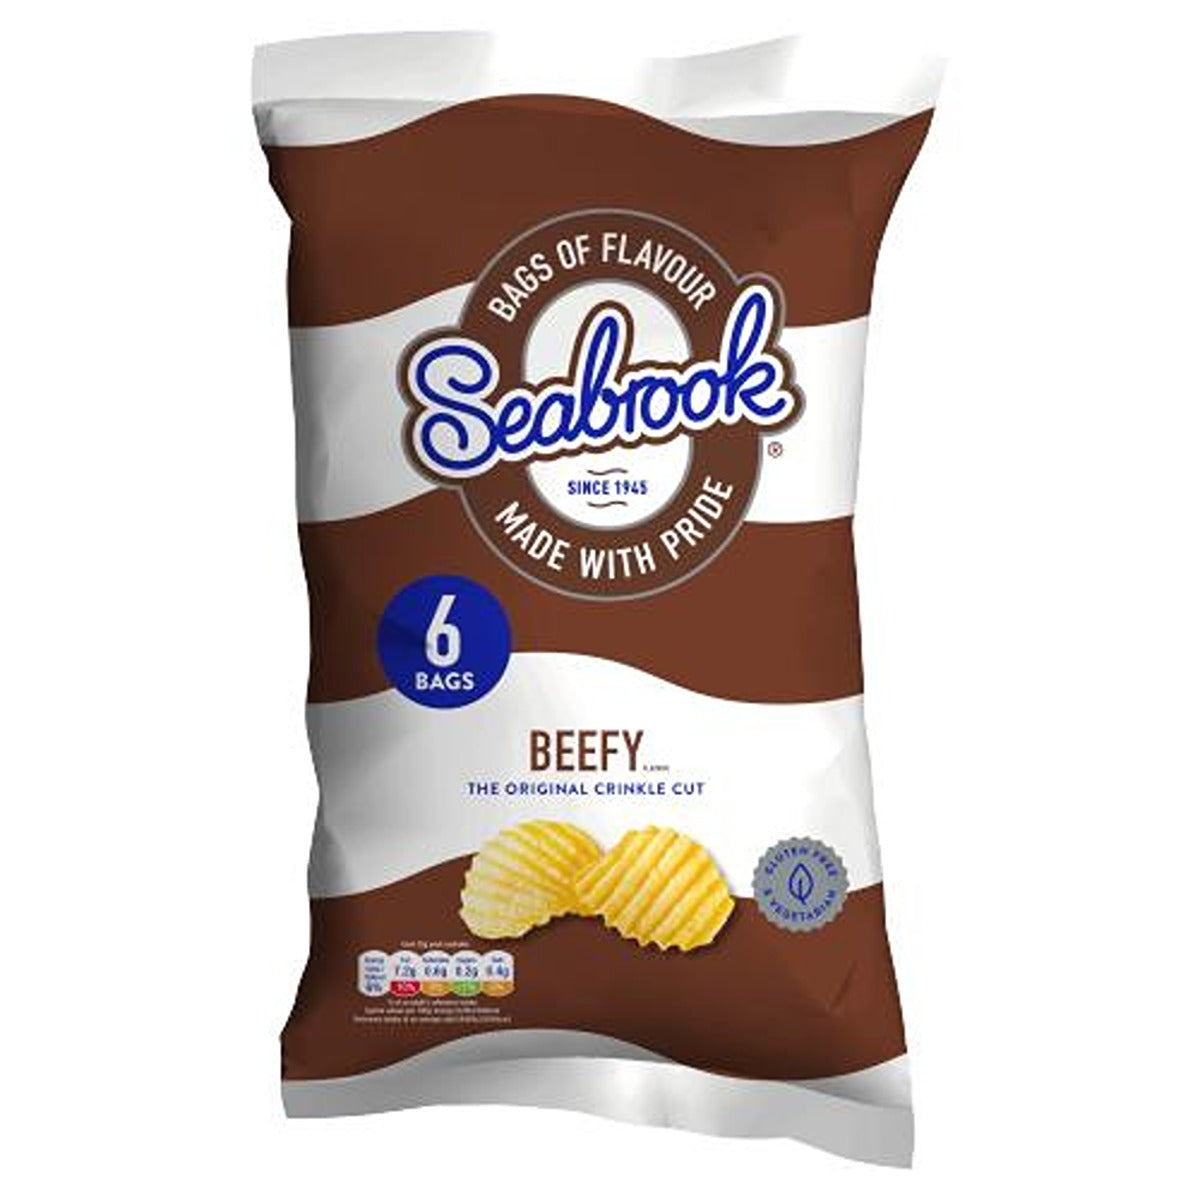 Seabrook - Crinkle Cut Beefy Flavour Crisps - 6 x 25g - Continental Food Store